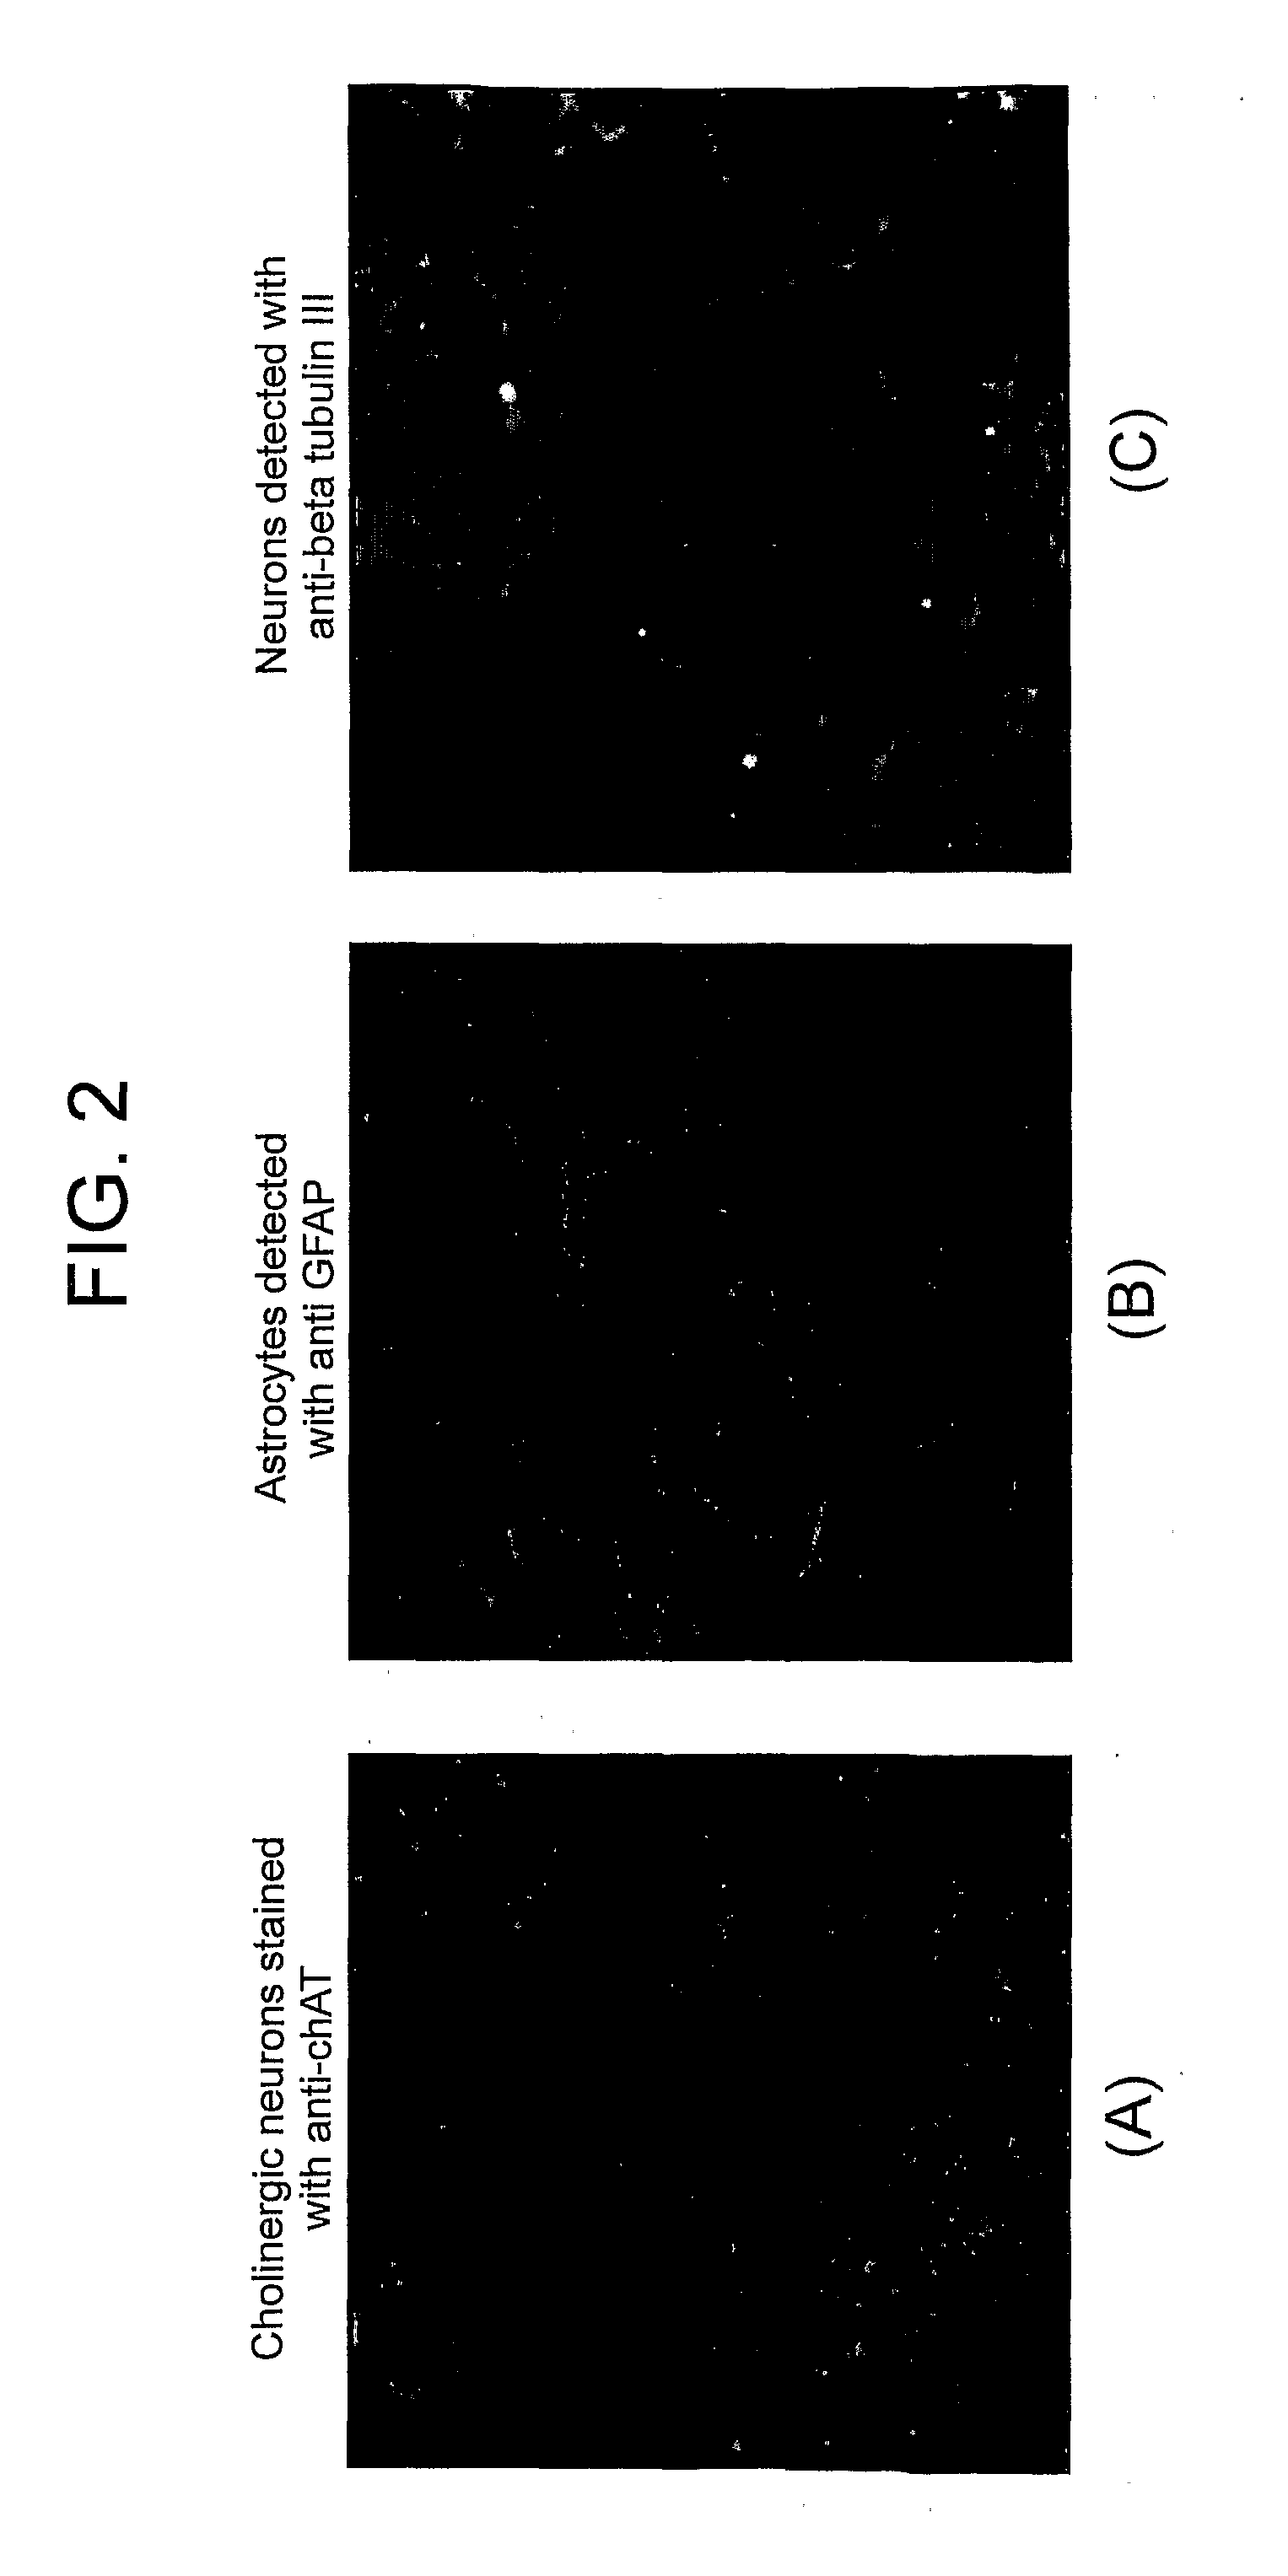 Method of Producing Organotypic Cell Cultures